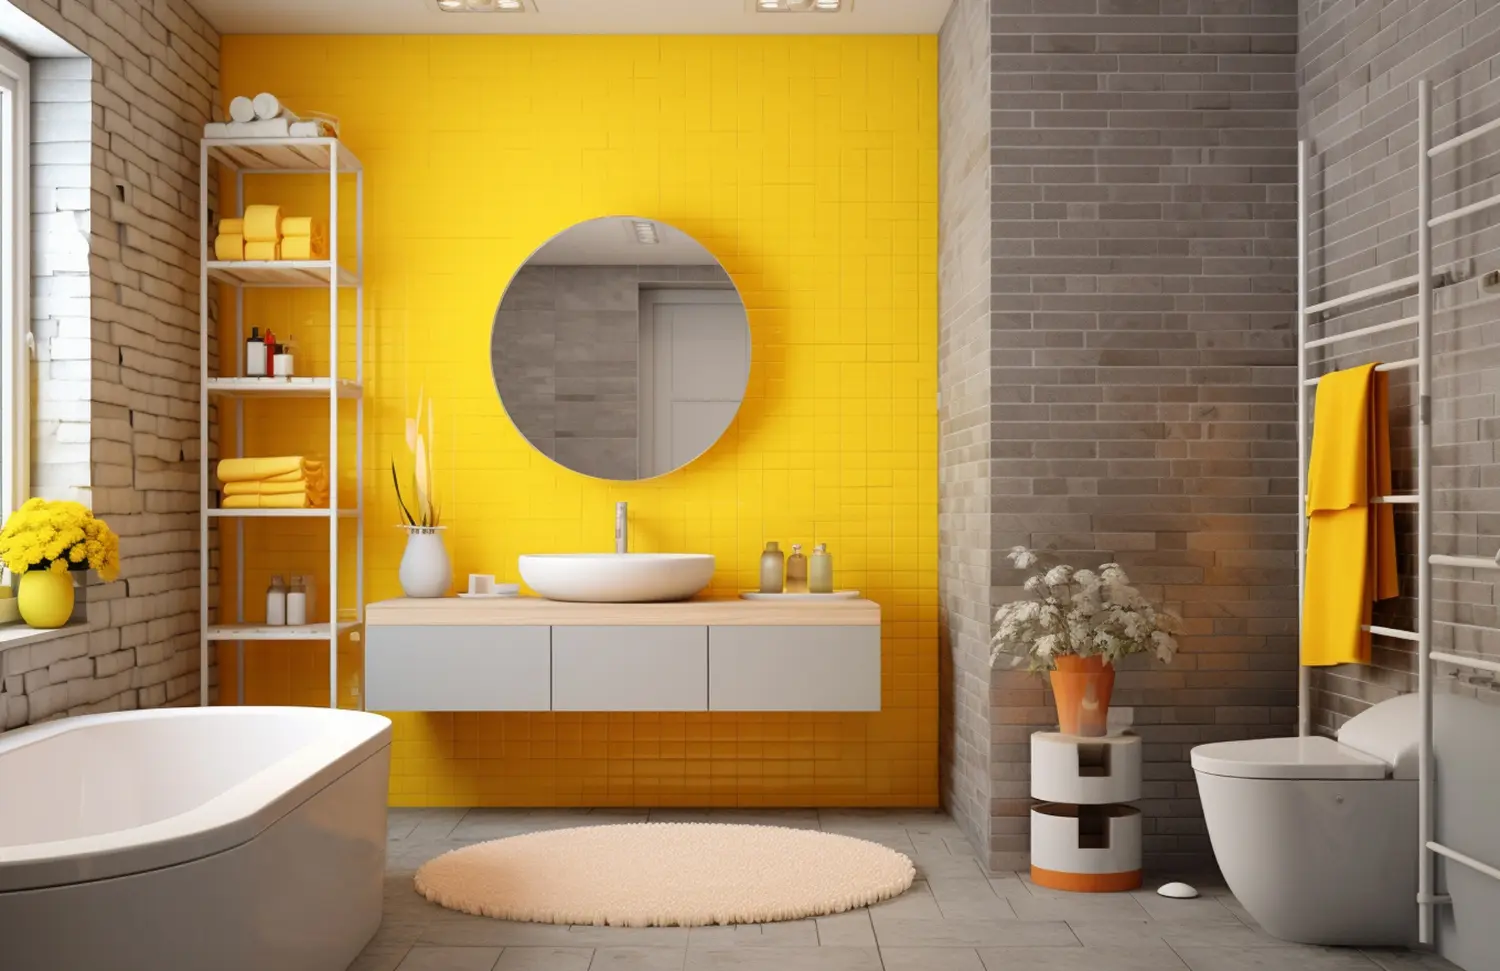 The Best Ceramic Wall Tile Ideas for Stylish Bathrooms